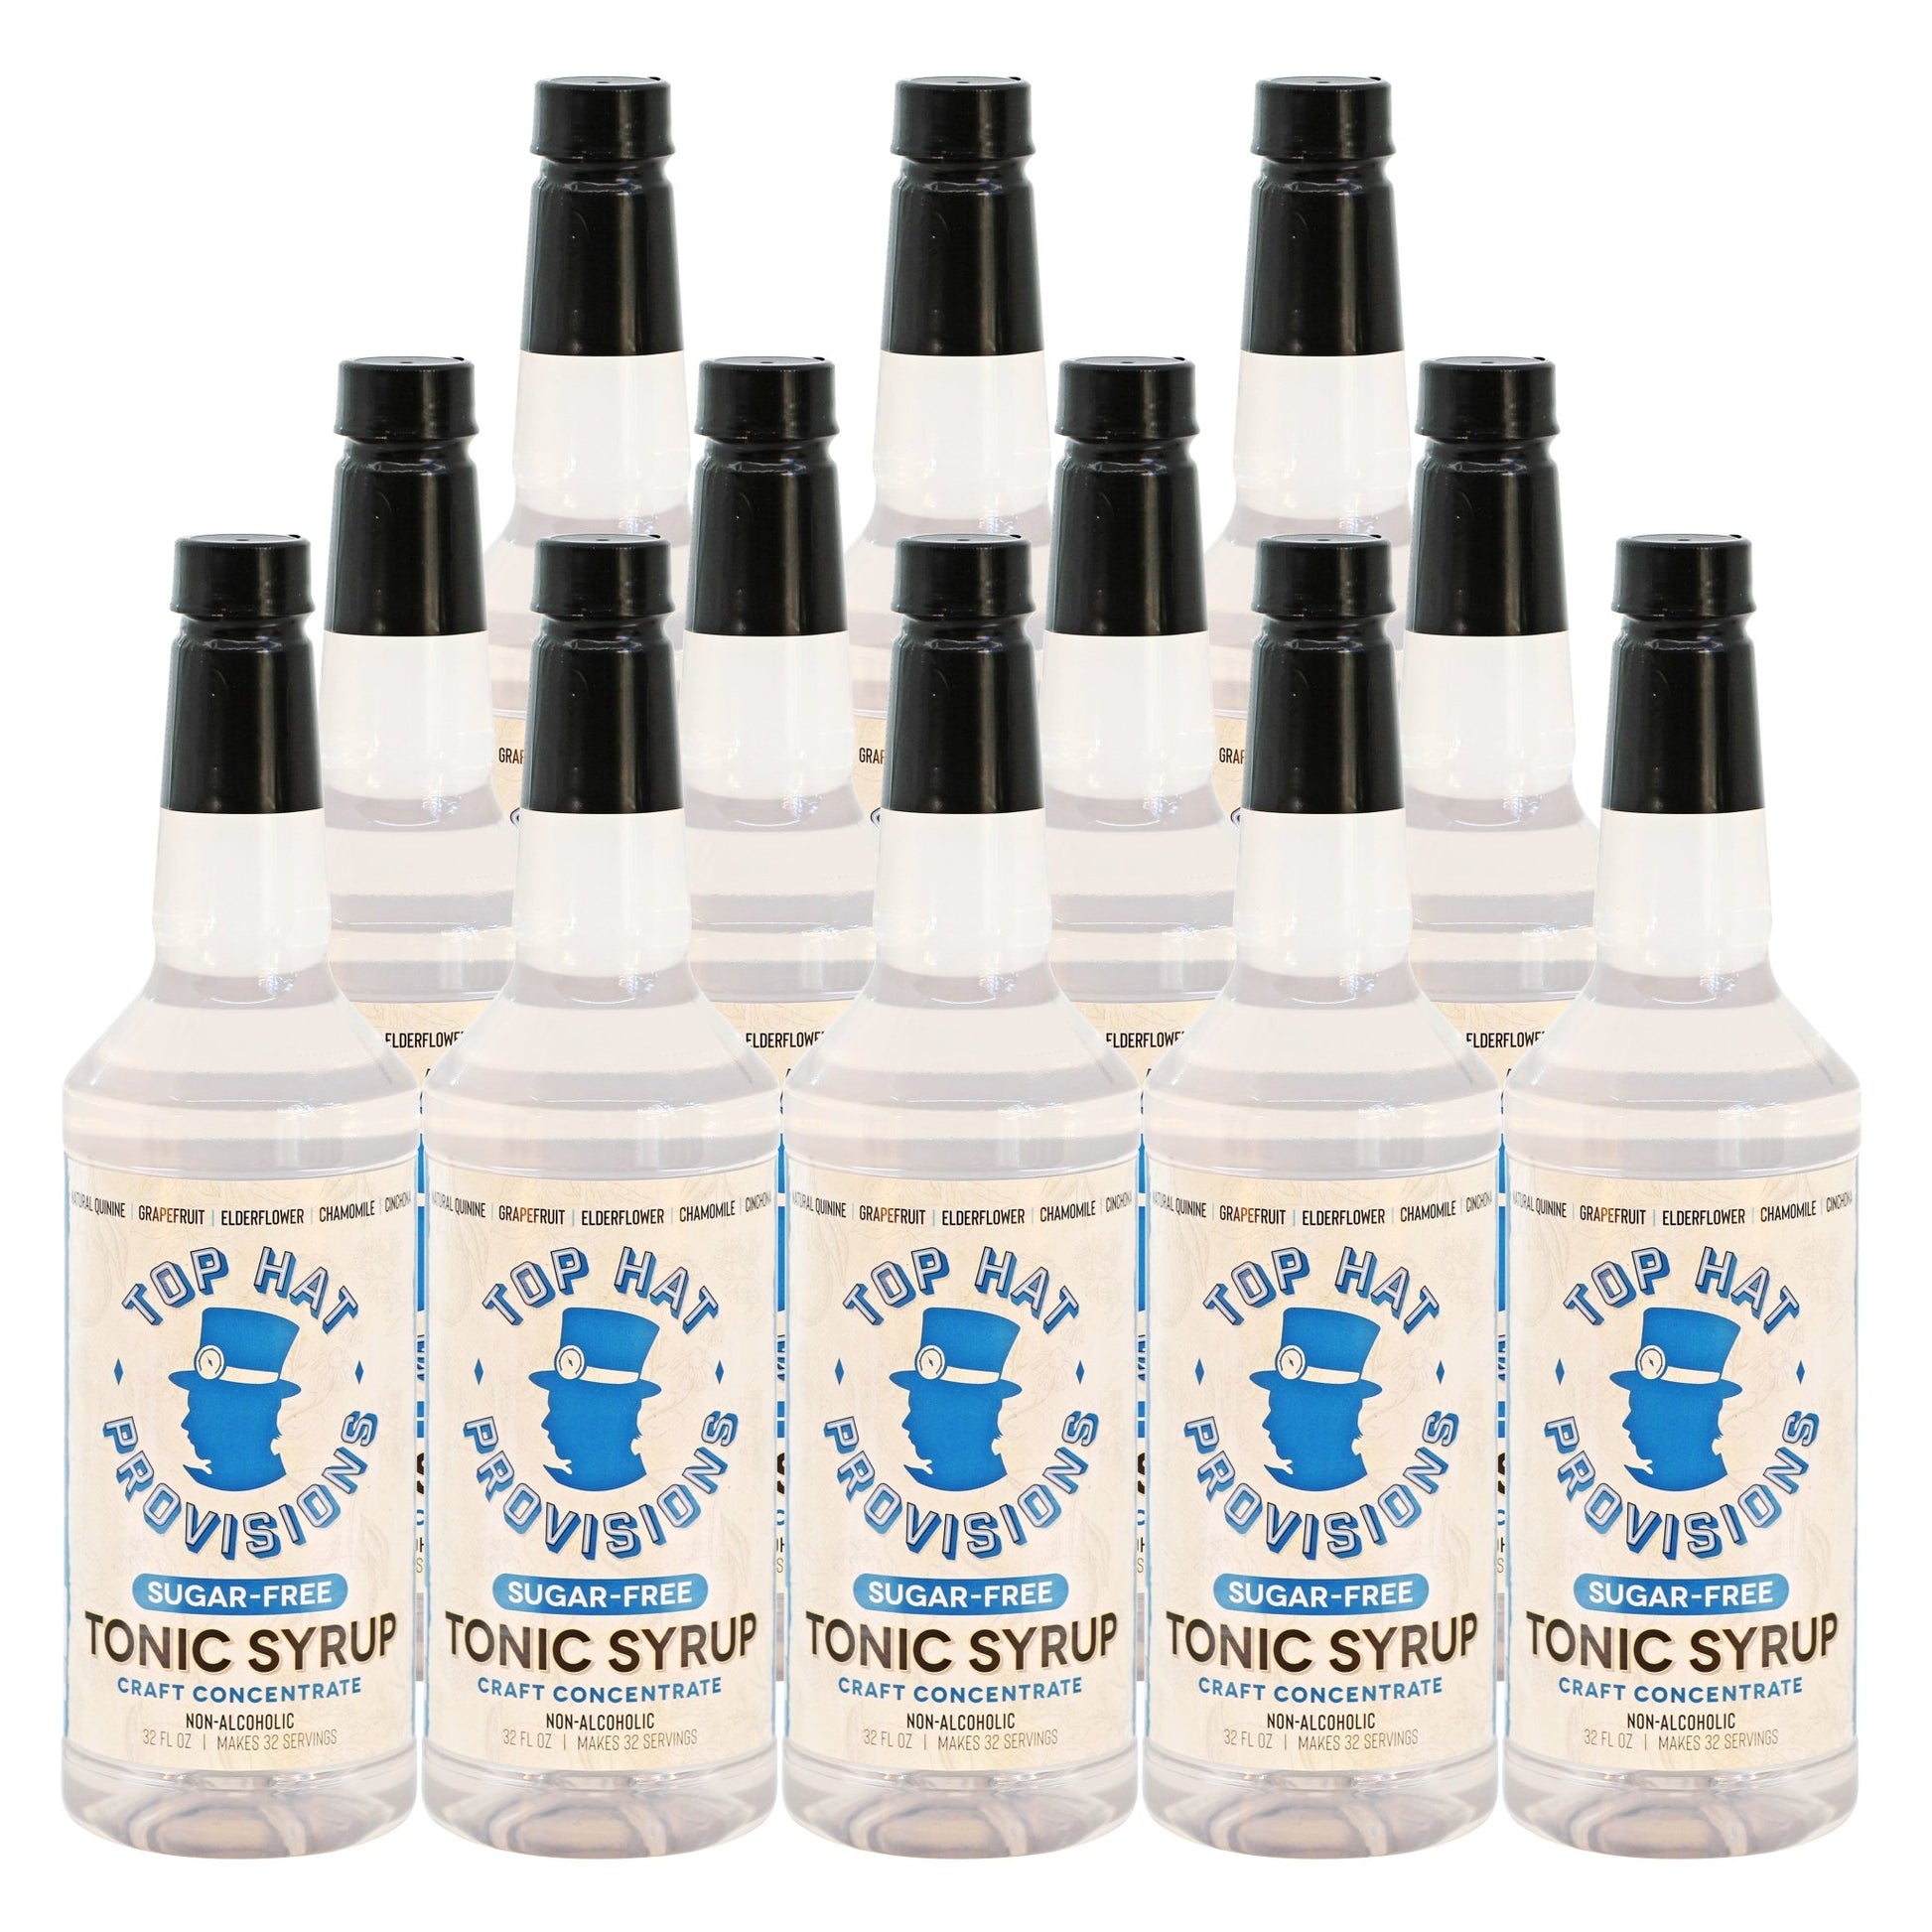 Top Hat Keto Sugar-Free Elderflower Tonic Syrup & 5x Quinine Concentrate - Naturally sweetened with keto friendly / carb free / zero sugar Monk Fruit - 12pack of 32oz bottles - Groove Rabbit